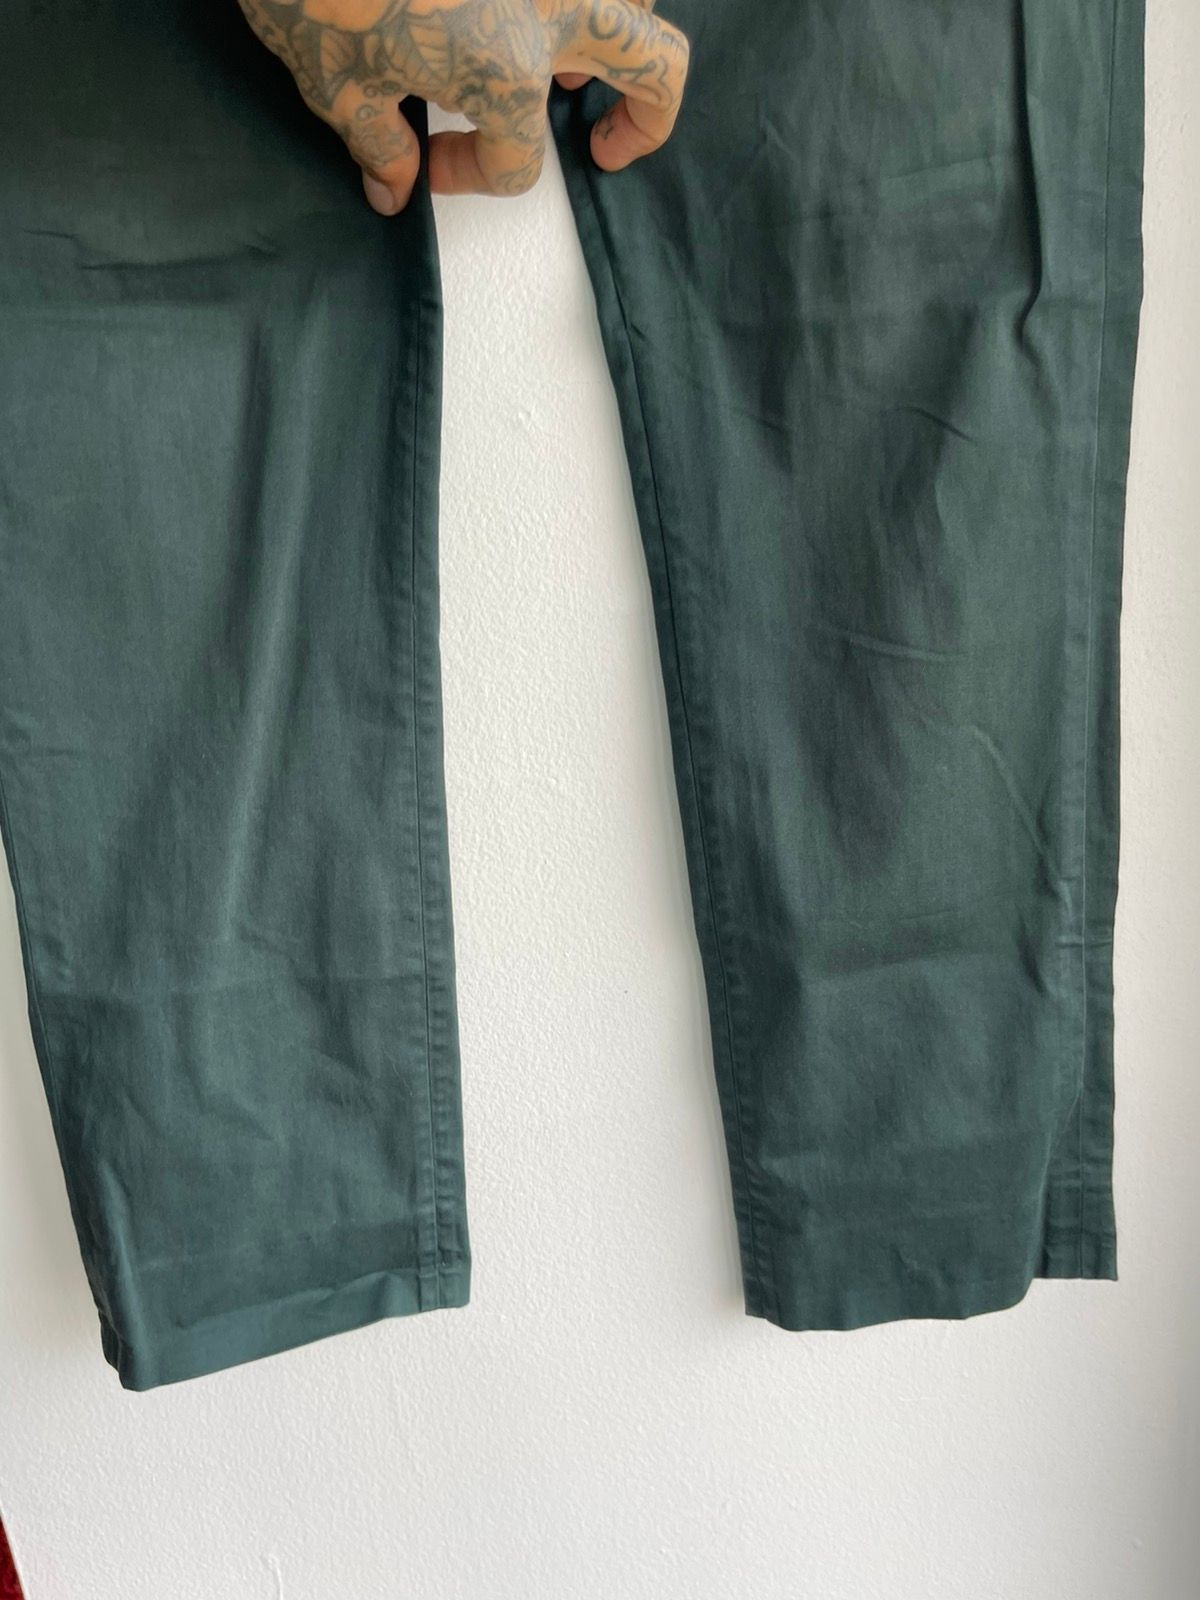 Dior Homme Forrest Green Chino Skate Pants SICK !